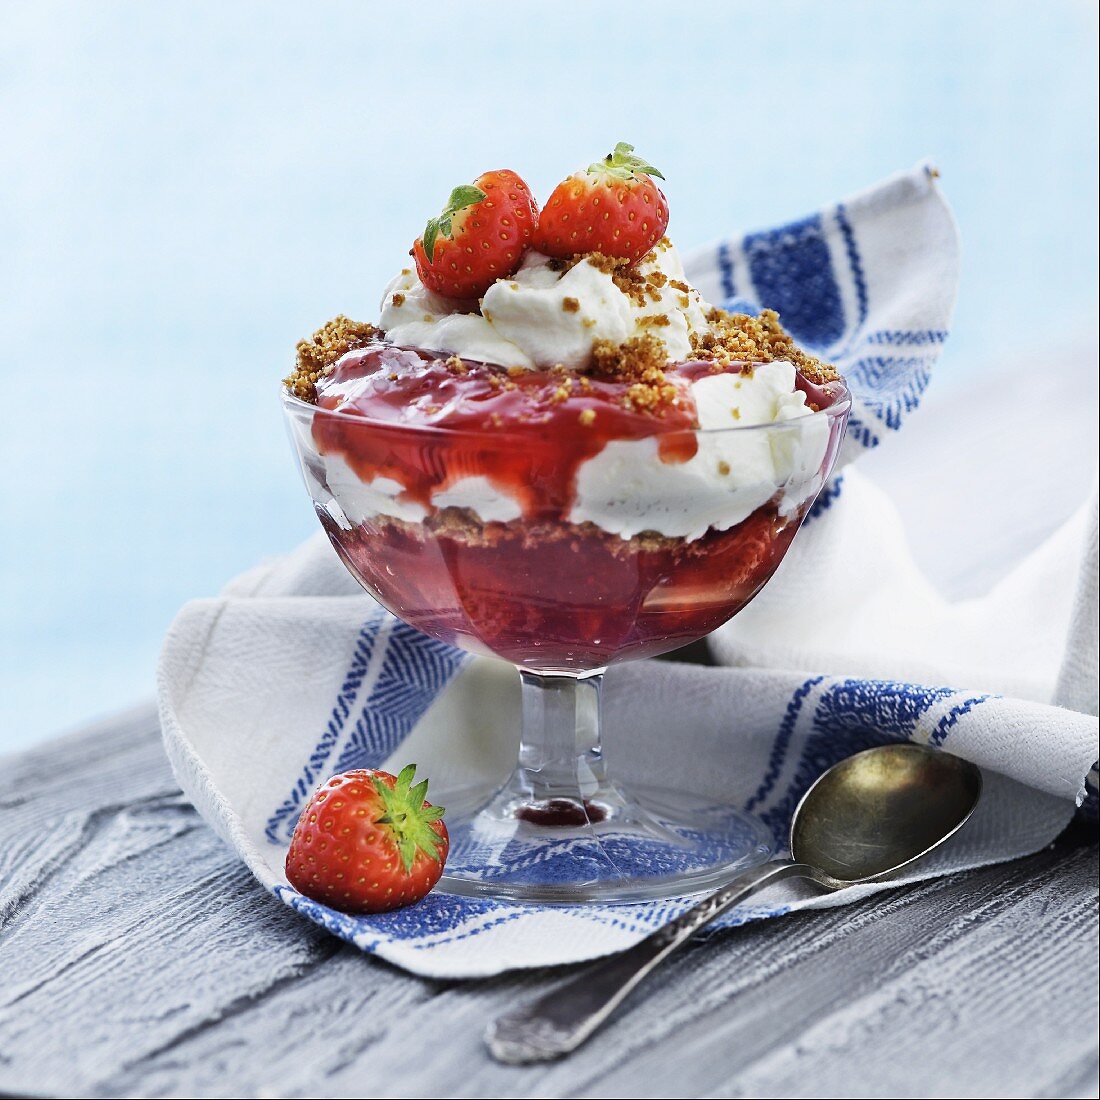 An ice cream sundae with strawberries and brittle